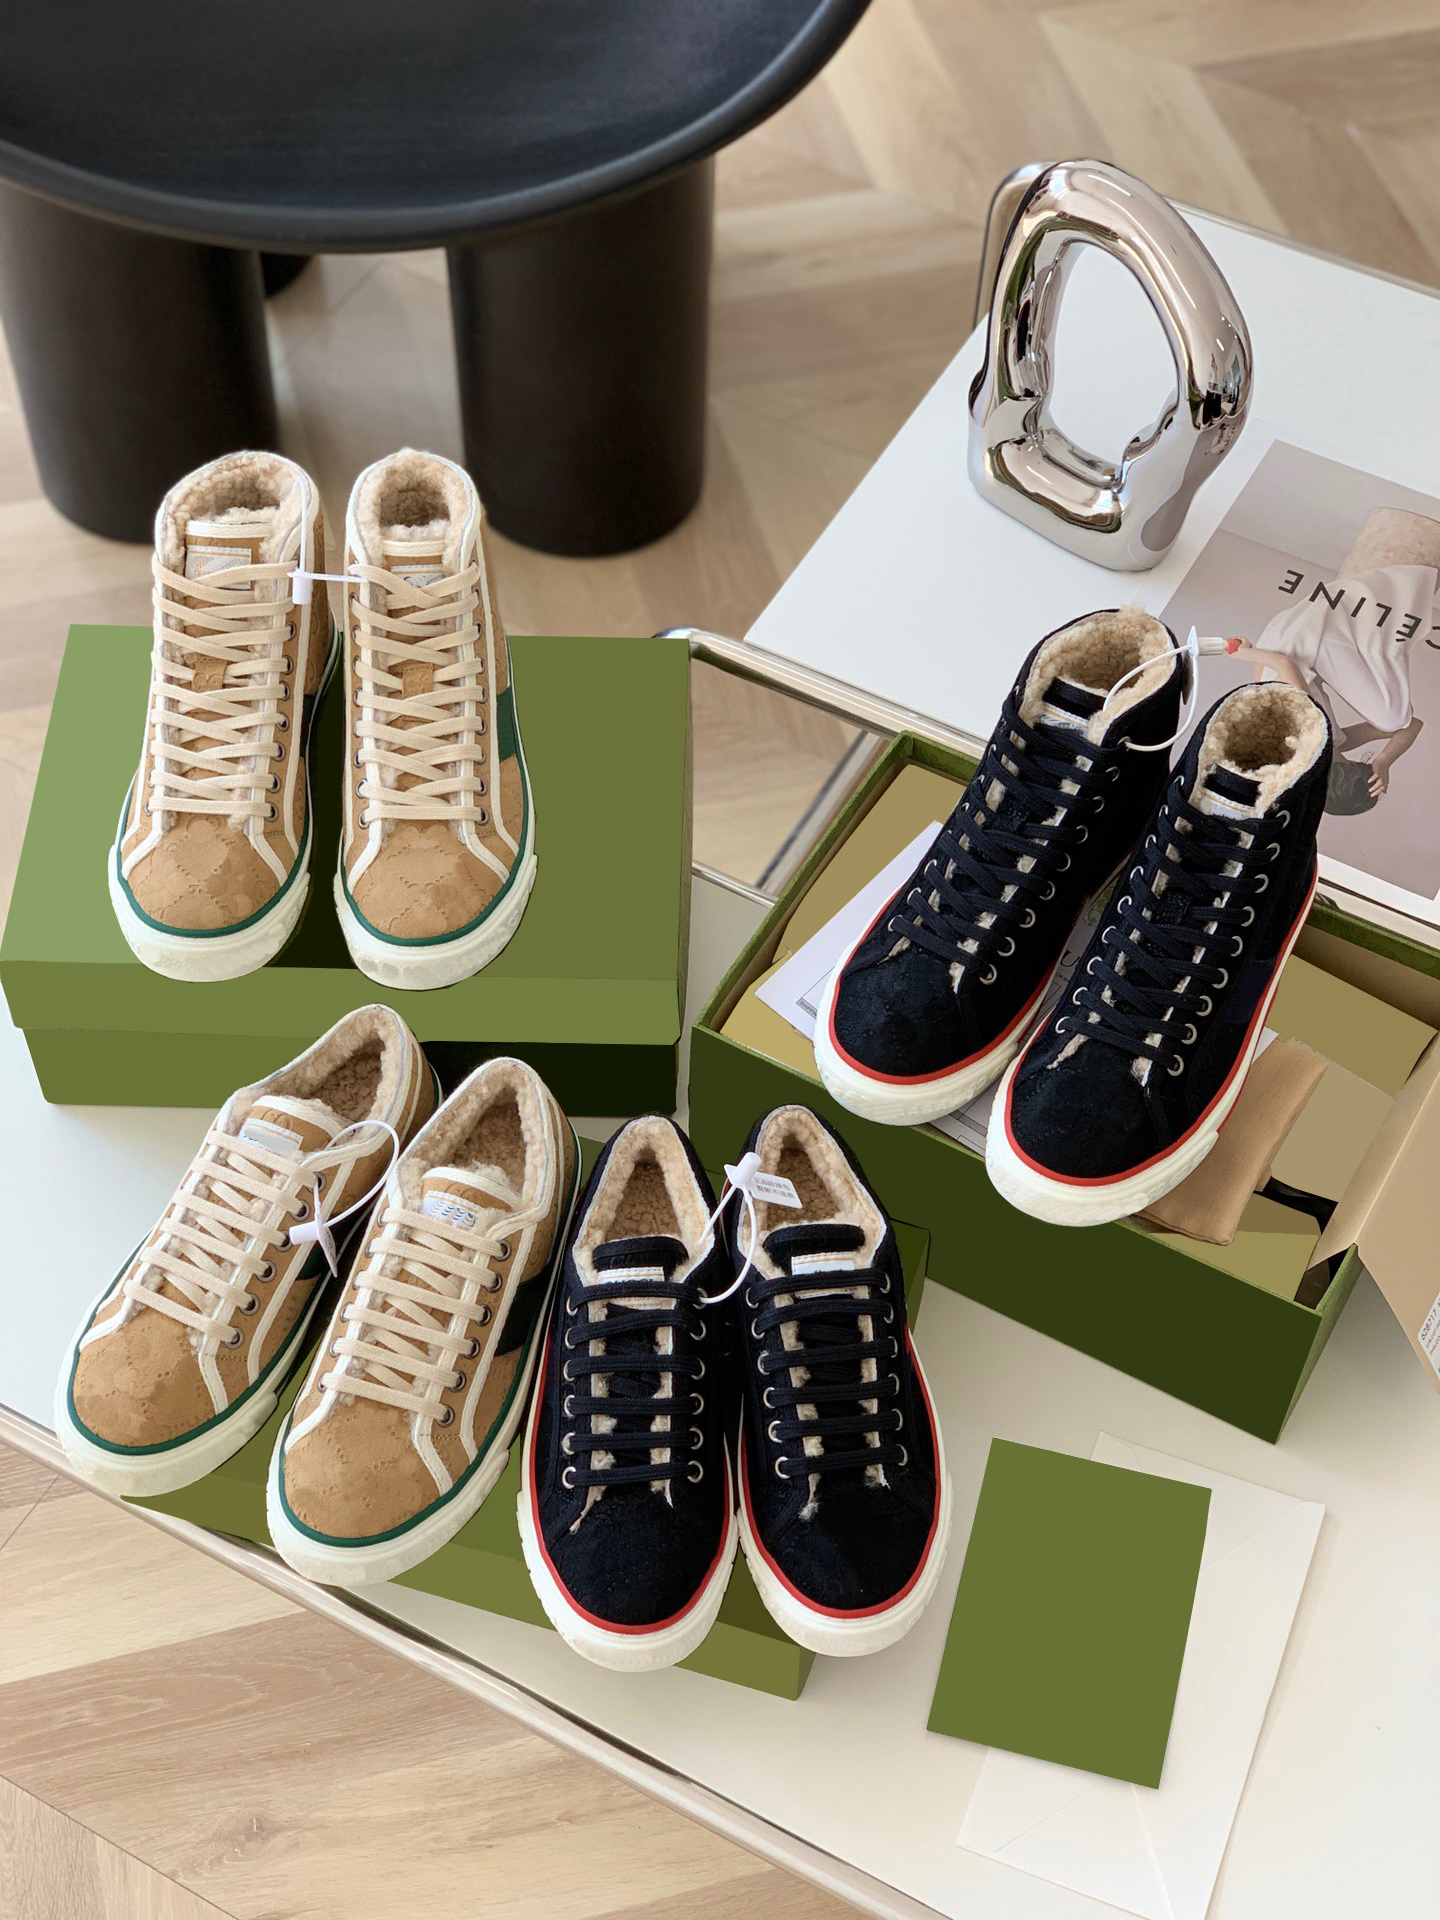 

2021 Luxury Designer Shoe Tennis canvas Beige Blue washed jacquard denim Women Shoes 1977 sneaker Ace Rubber sole Embroidered Vintage casual Sneakers with box, Color30